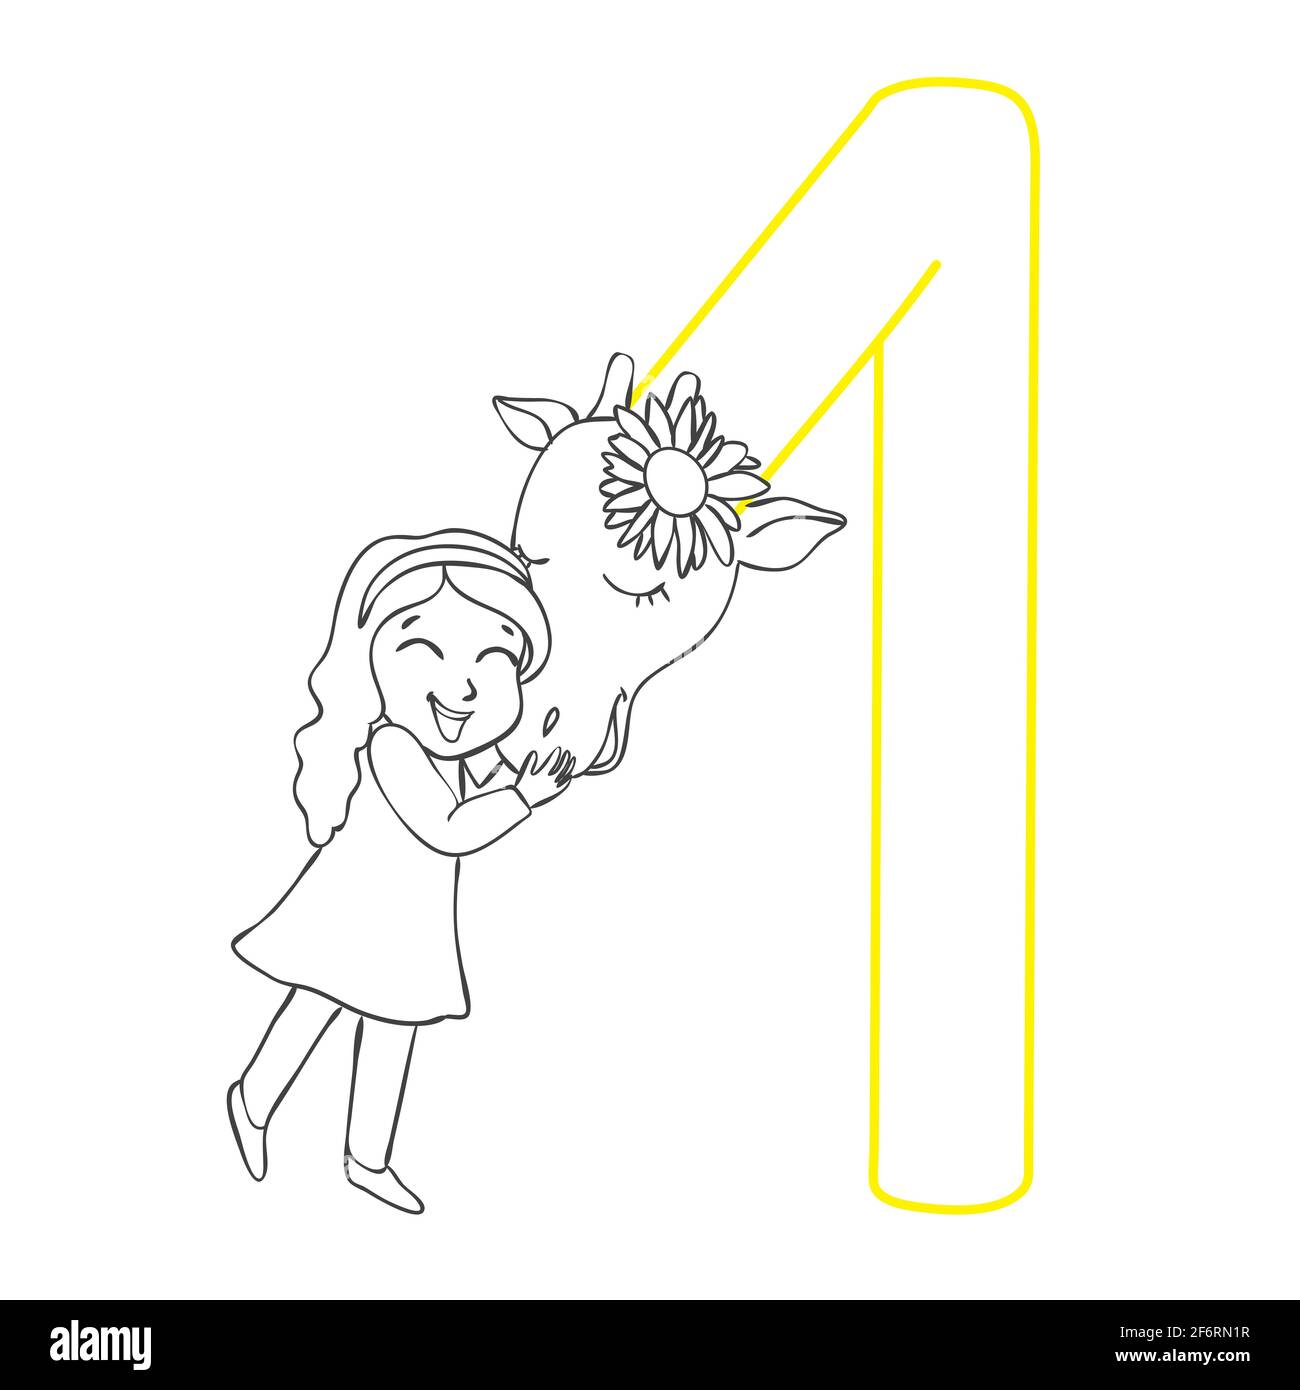 Girl hugging a giraffe. Vector illustration of hand-drawn. Coloring book for adults and children. Stock Vector